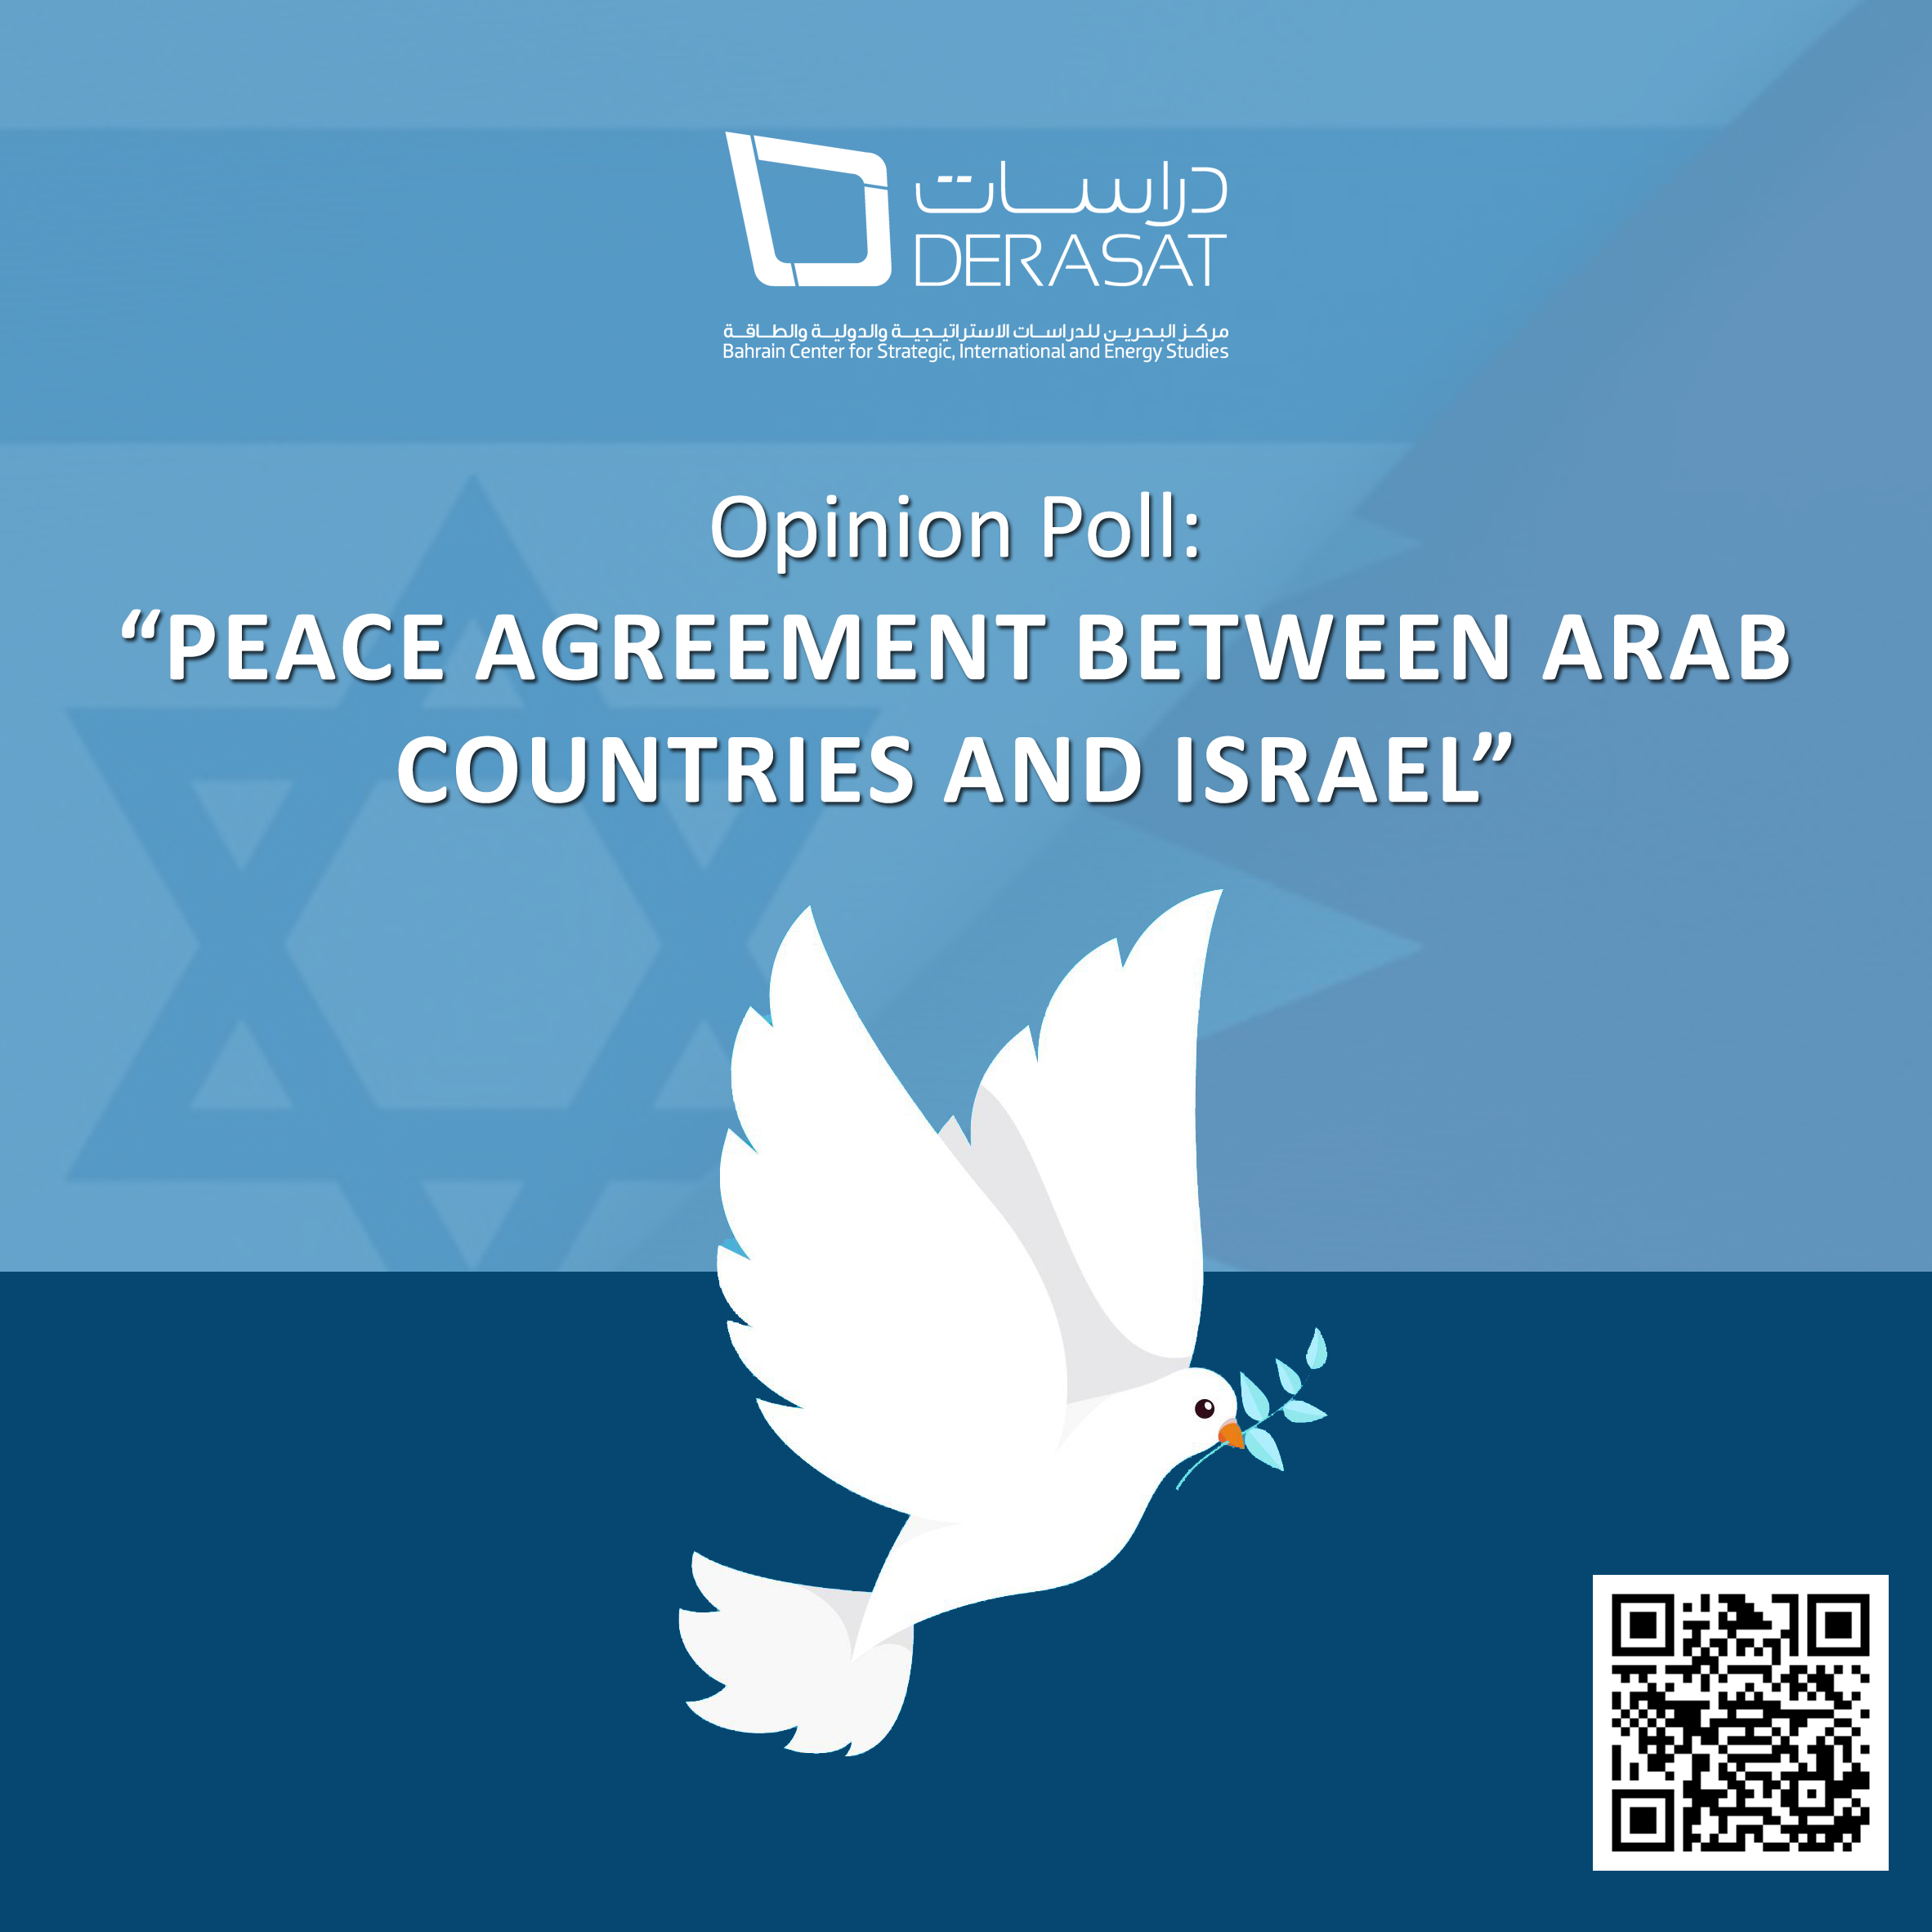 Opinion Poll on “Peace Agreement Between Arab Countries & Israel”